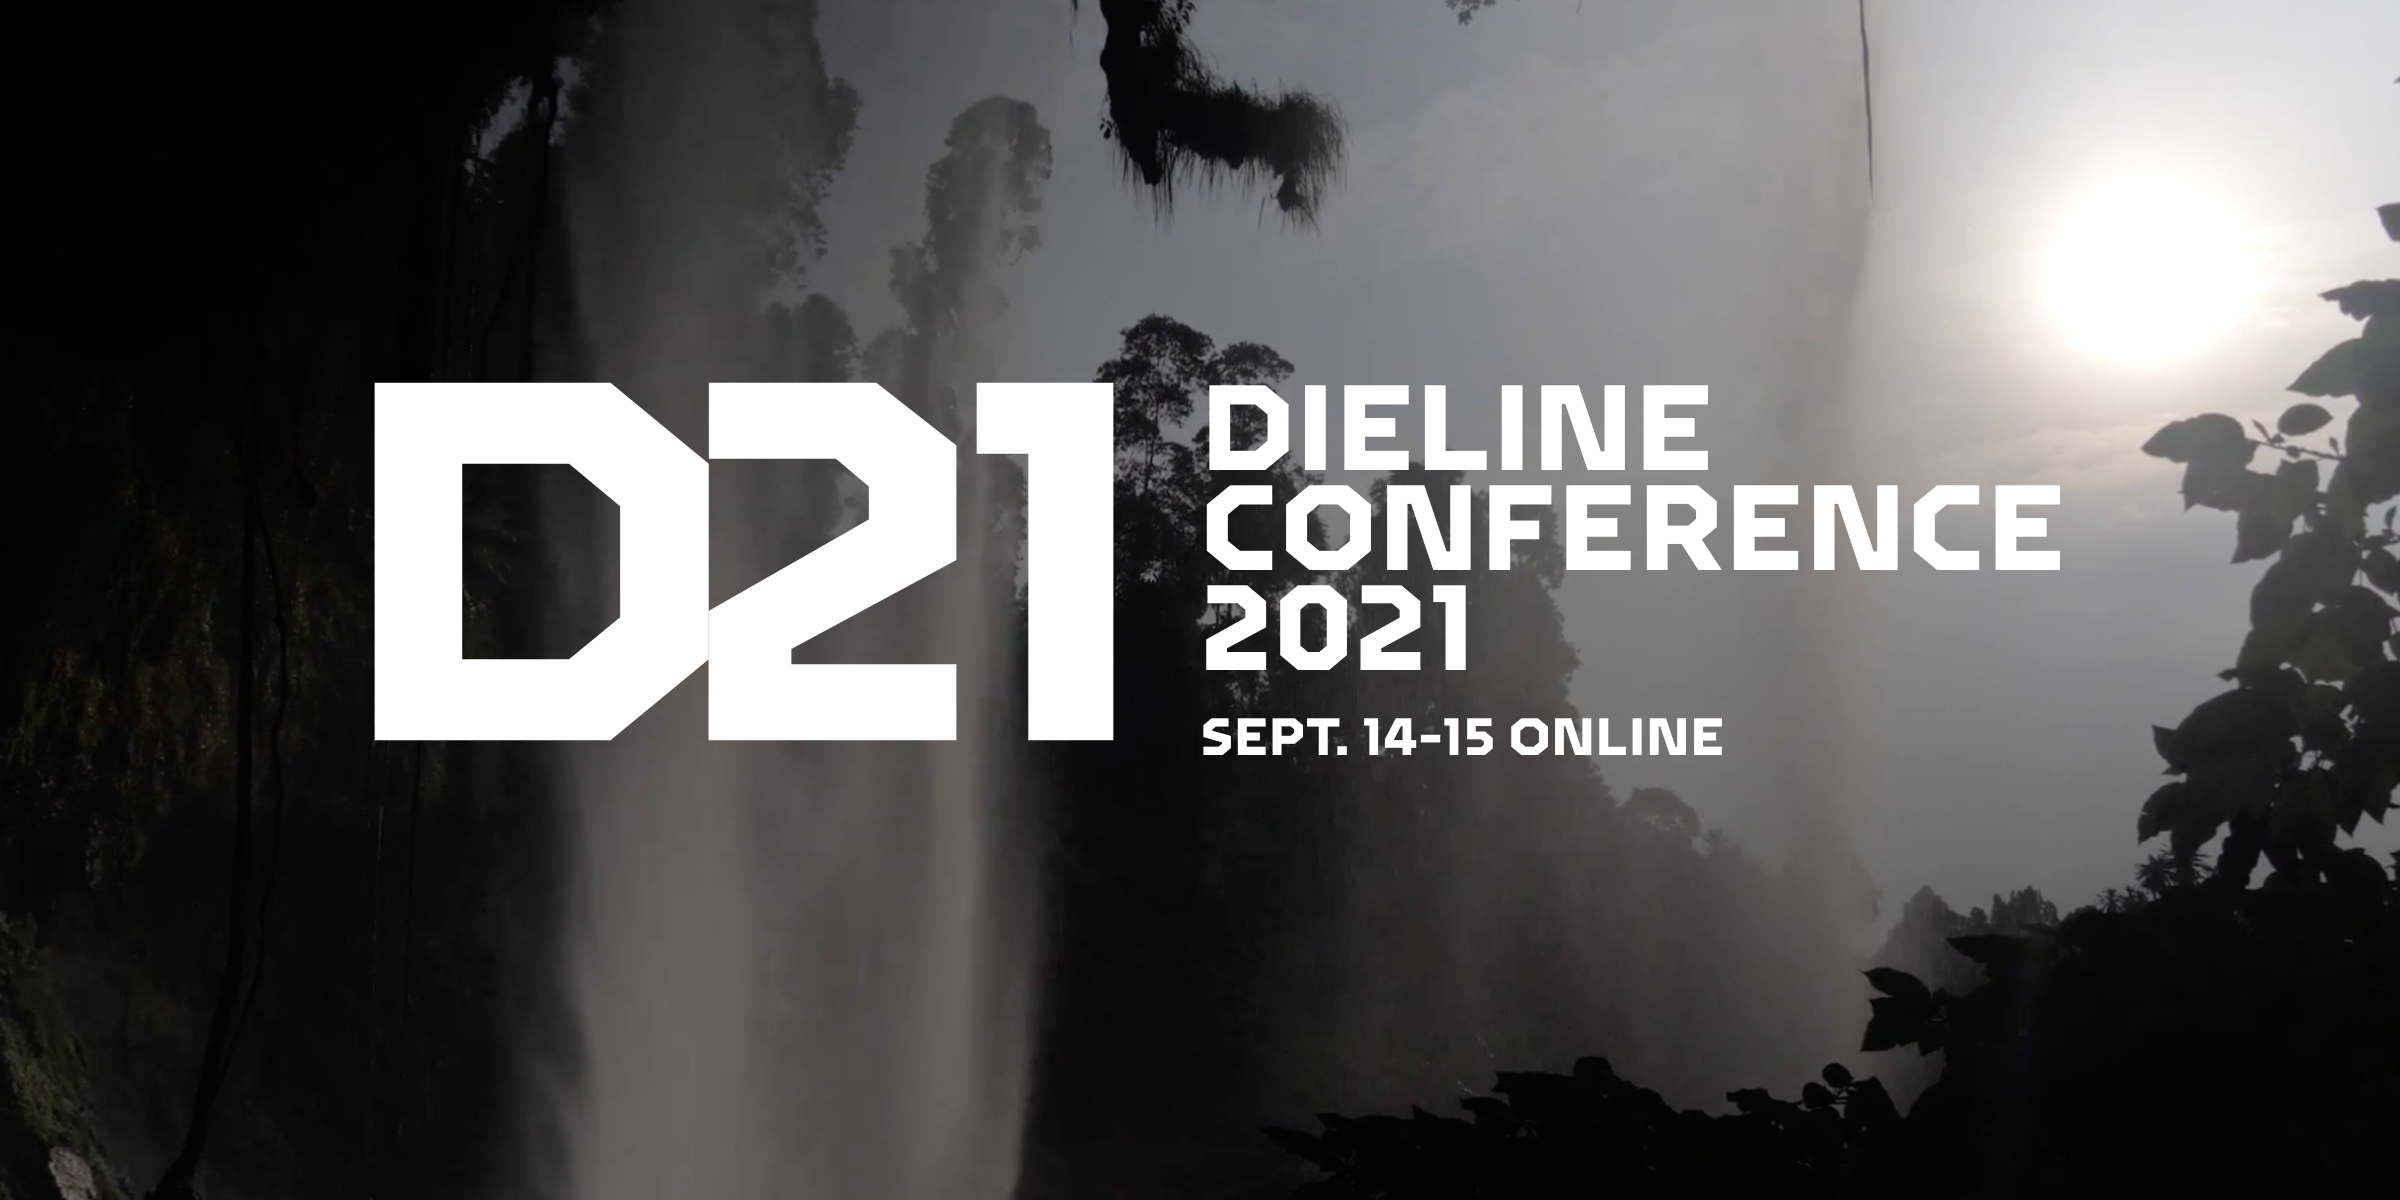 WHO IS SPEAKING AT DIELINE CONFERENCE (ONLINE) 2021?